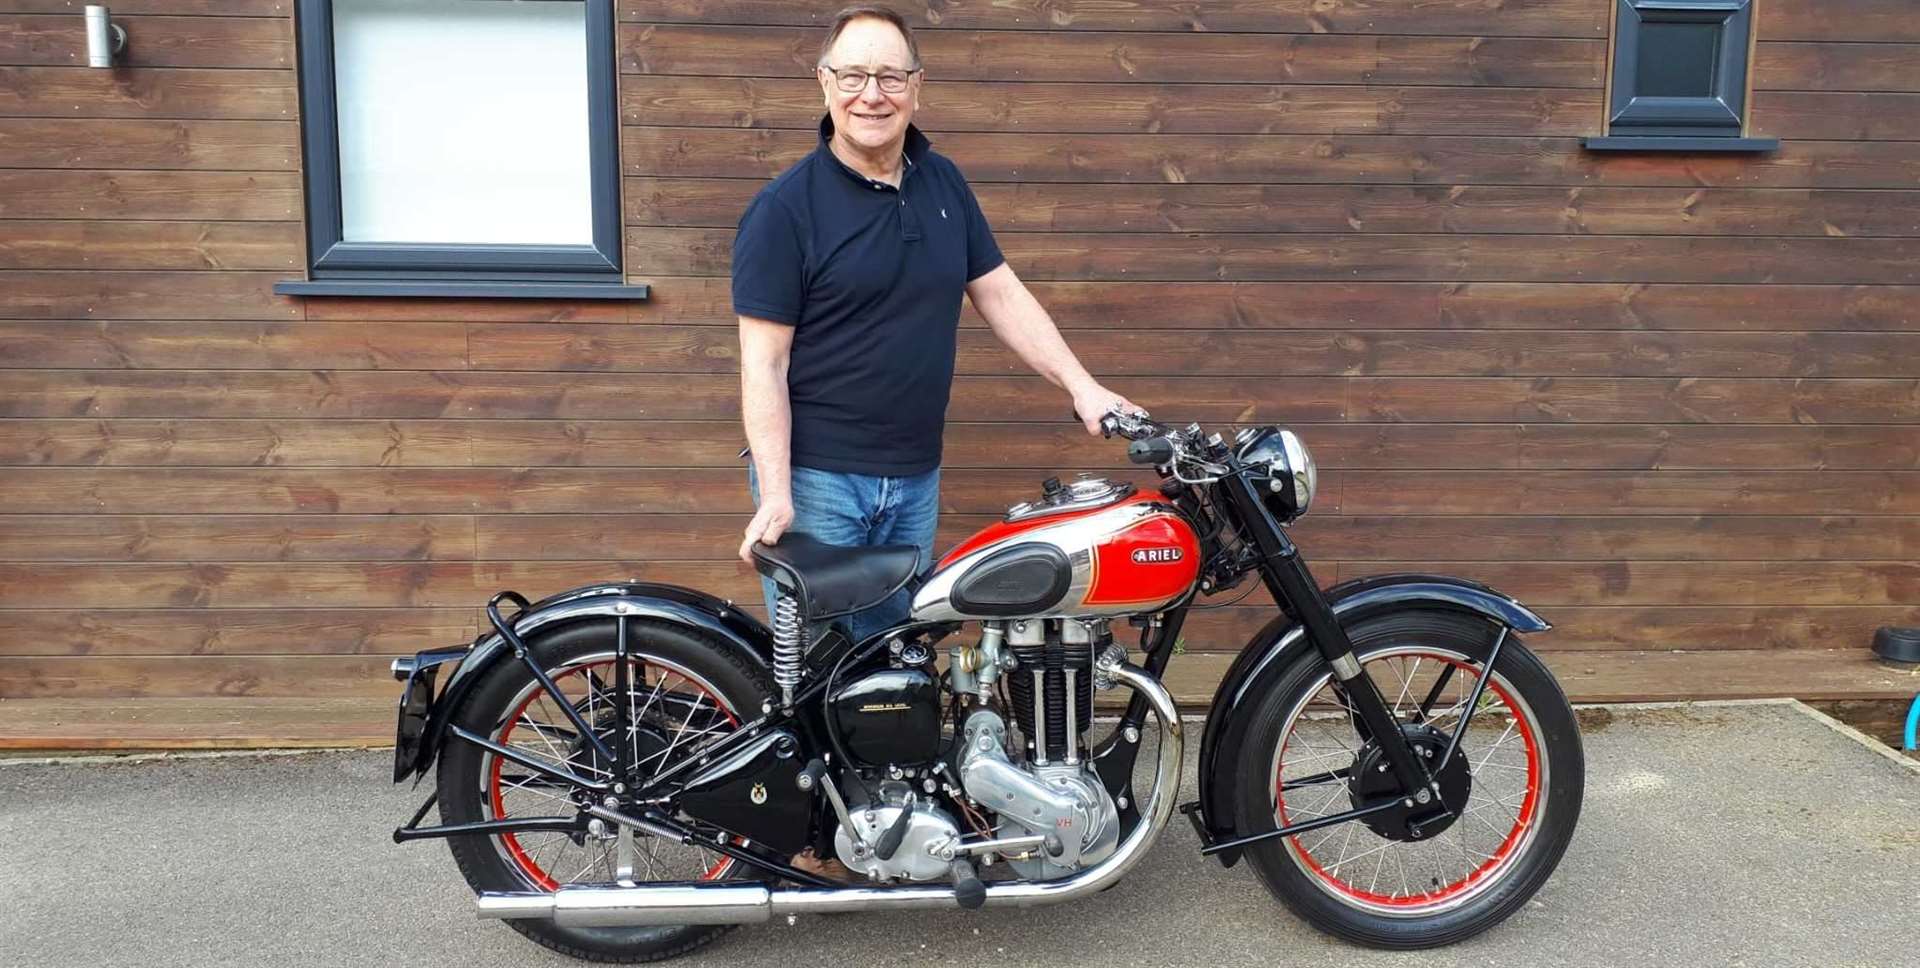 Stephen Betts, from West Malling, has been reunited with his classic motorbike 27 years after it was stolen